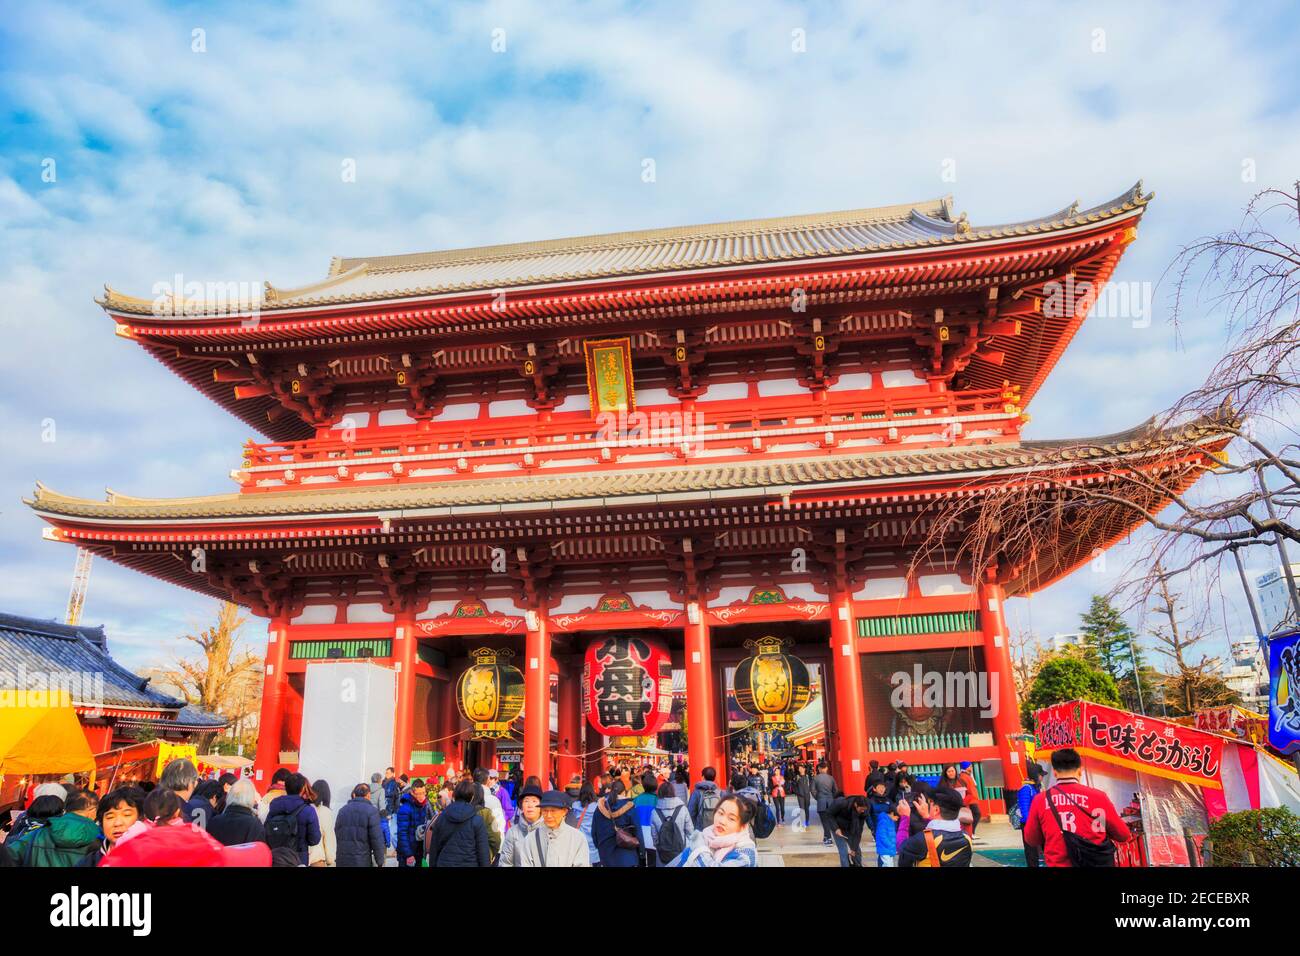 Tokyo, Japan - 2 January 2020: Senso Ji shinto temple main gate and temple with unrecognisable crowd of people. Stock Photo